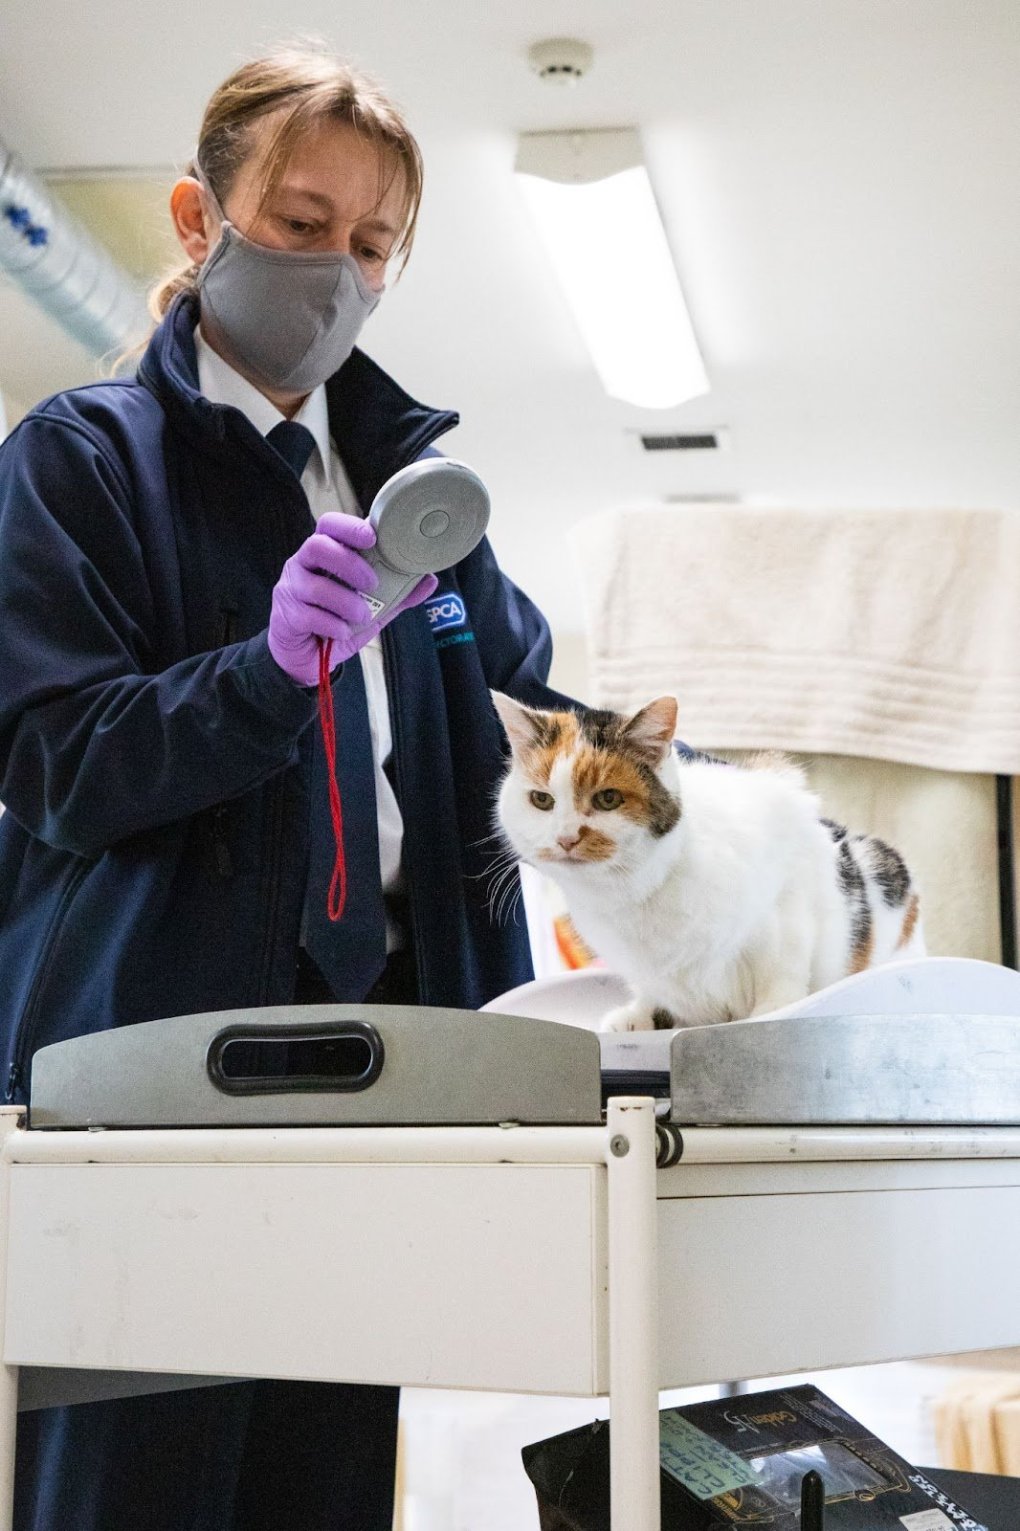 Almost HALF of Adults in England Unaware of Cat Microchipping Laws